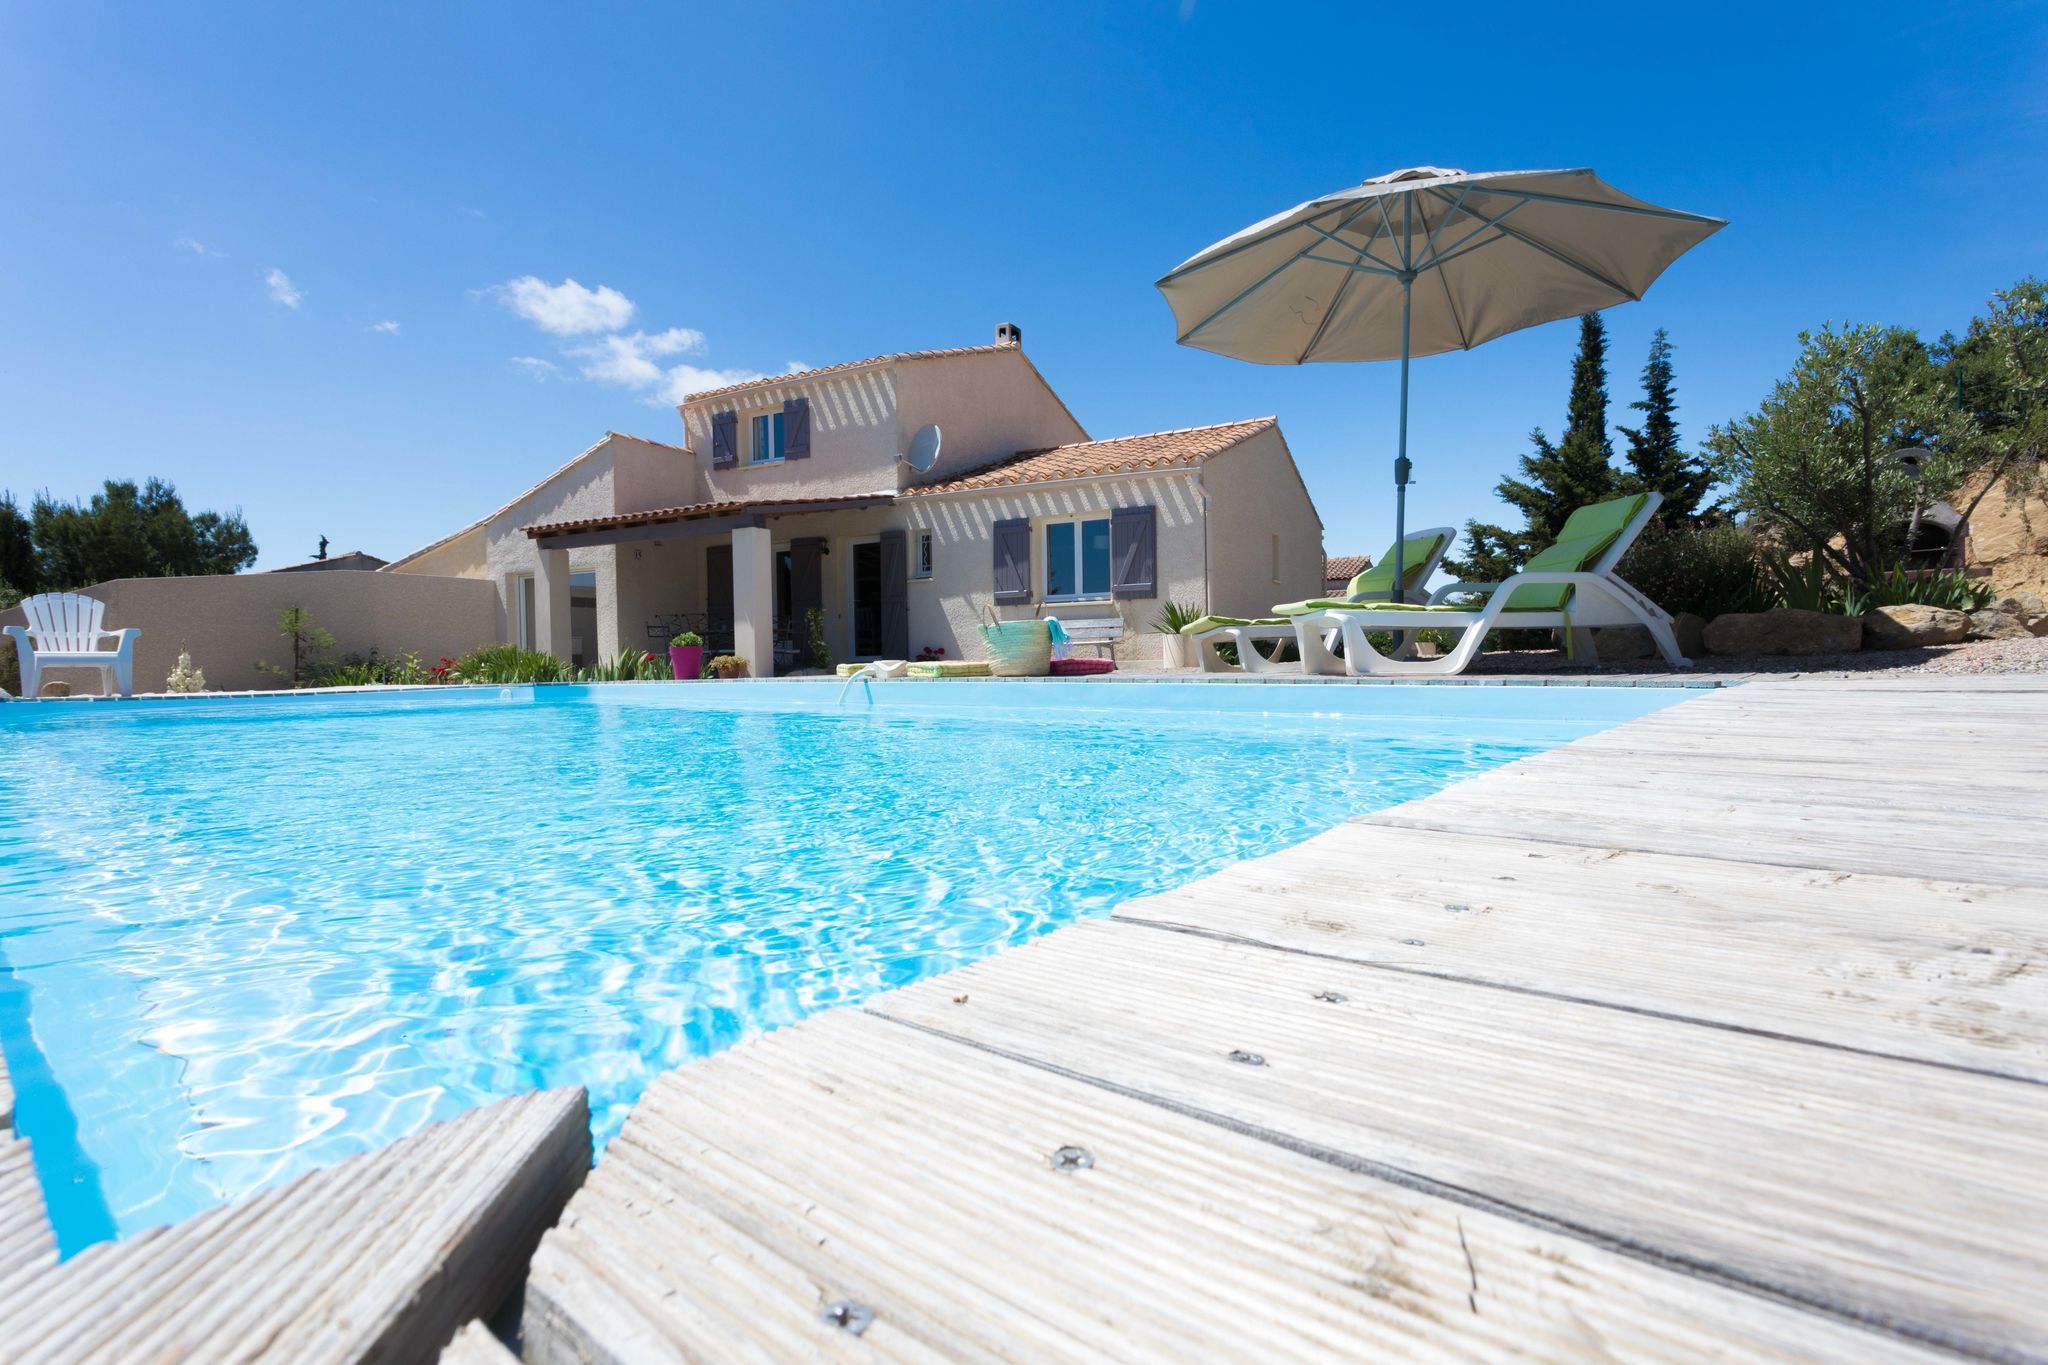 Spacious villa, plenty of privacy, private swimming pool surrounded by vineyards